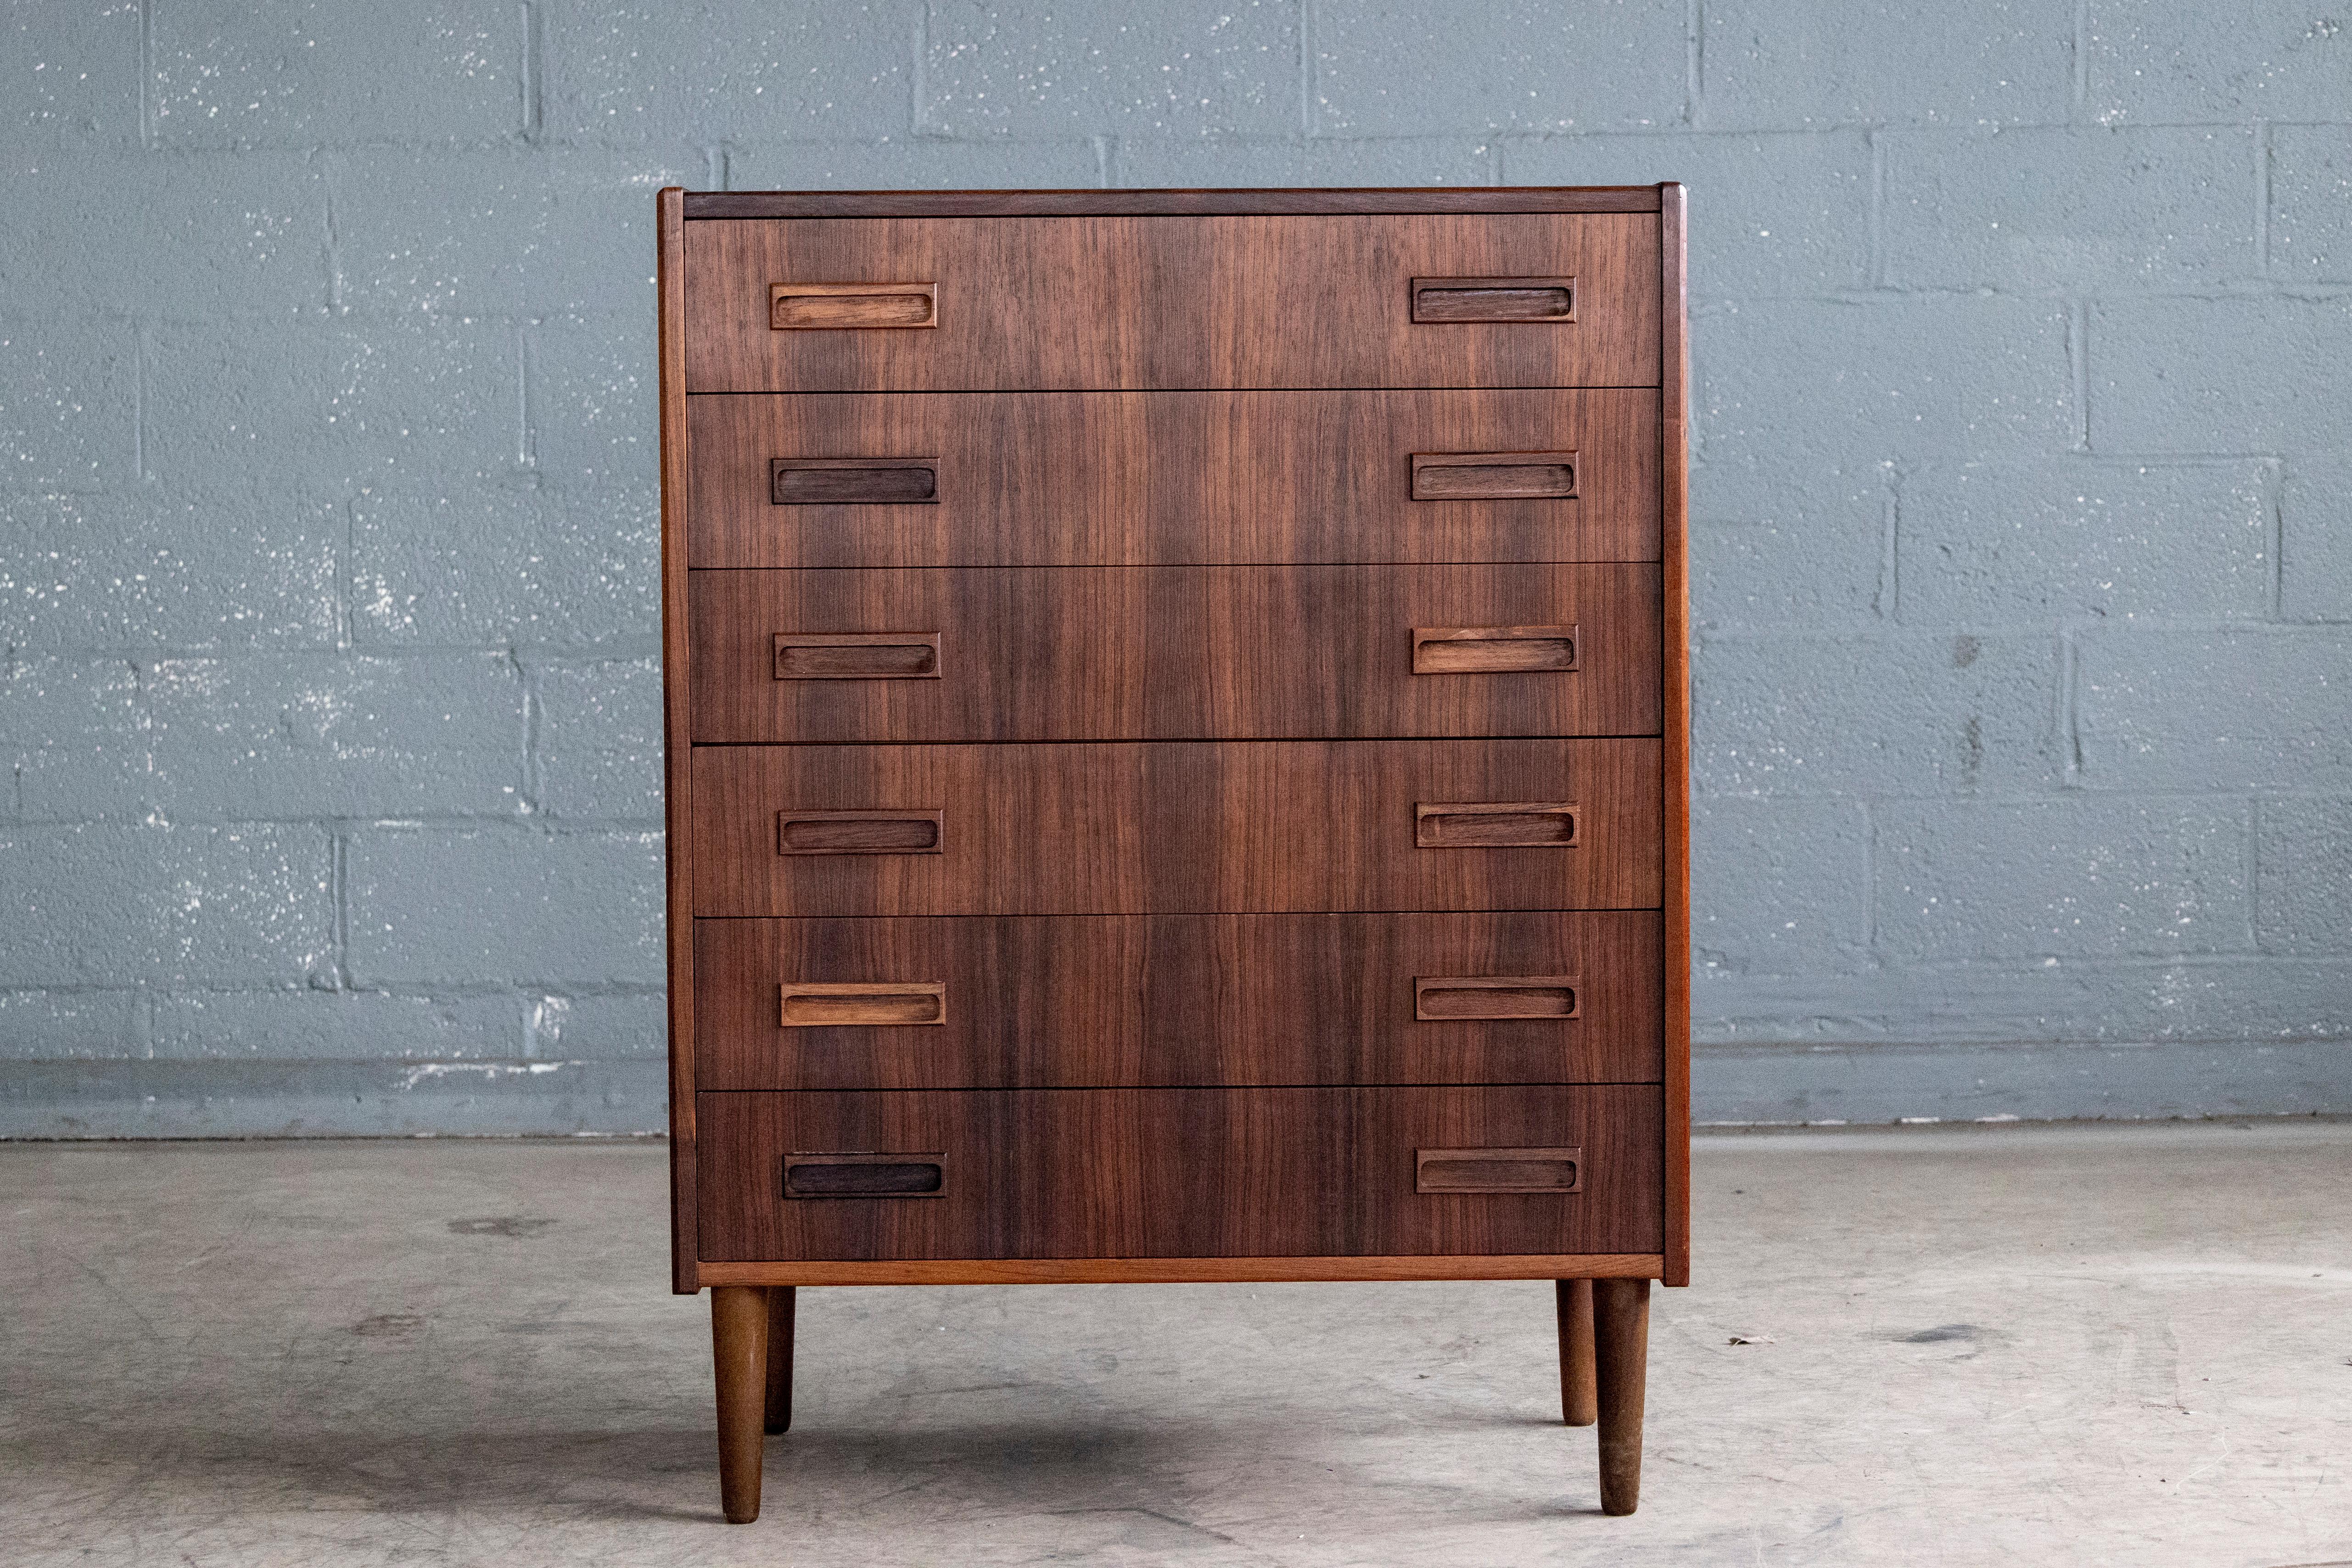 Exquisite Danish 1960s rosewood chest of drawers with six large drawers in bookmatched rosewood veneer. High quality craftmanship with solid edges and carved drawer pulls. Drawer fronts made from solid ply and assembled with dove tailing. Unmarked.